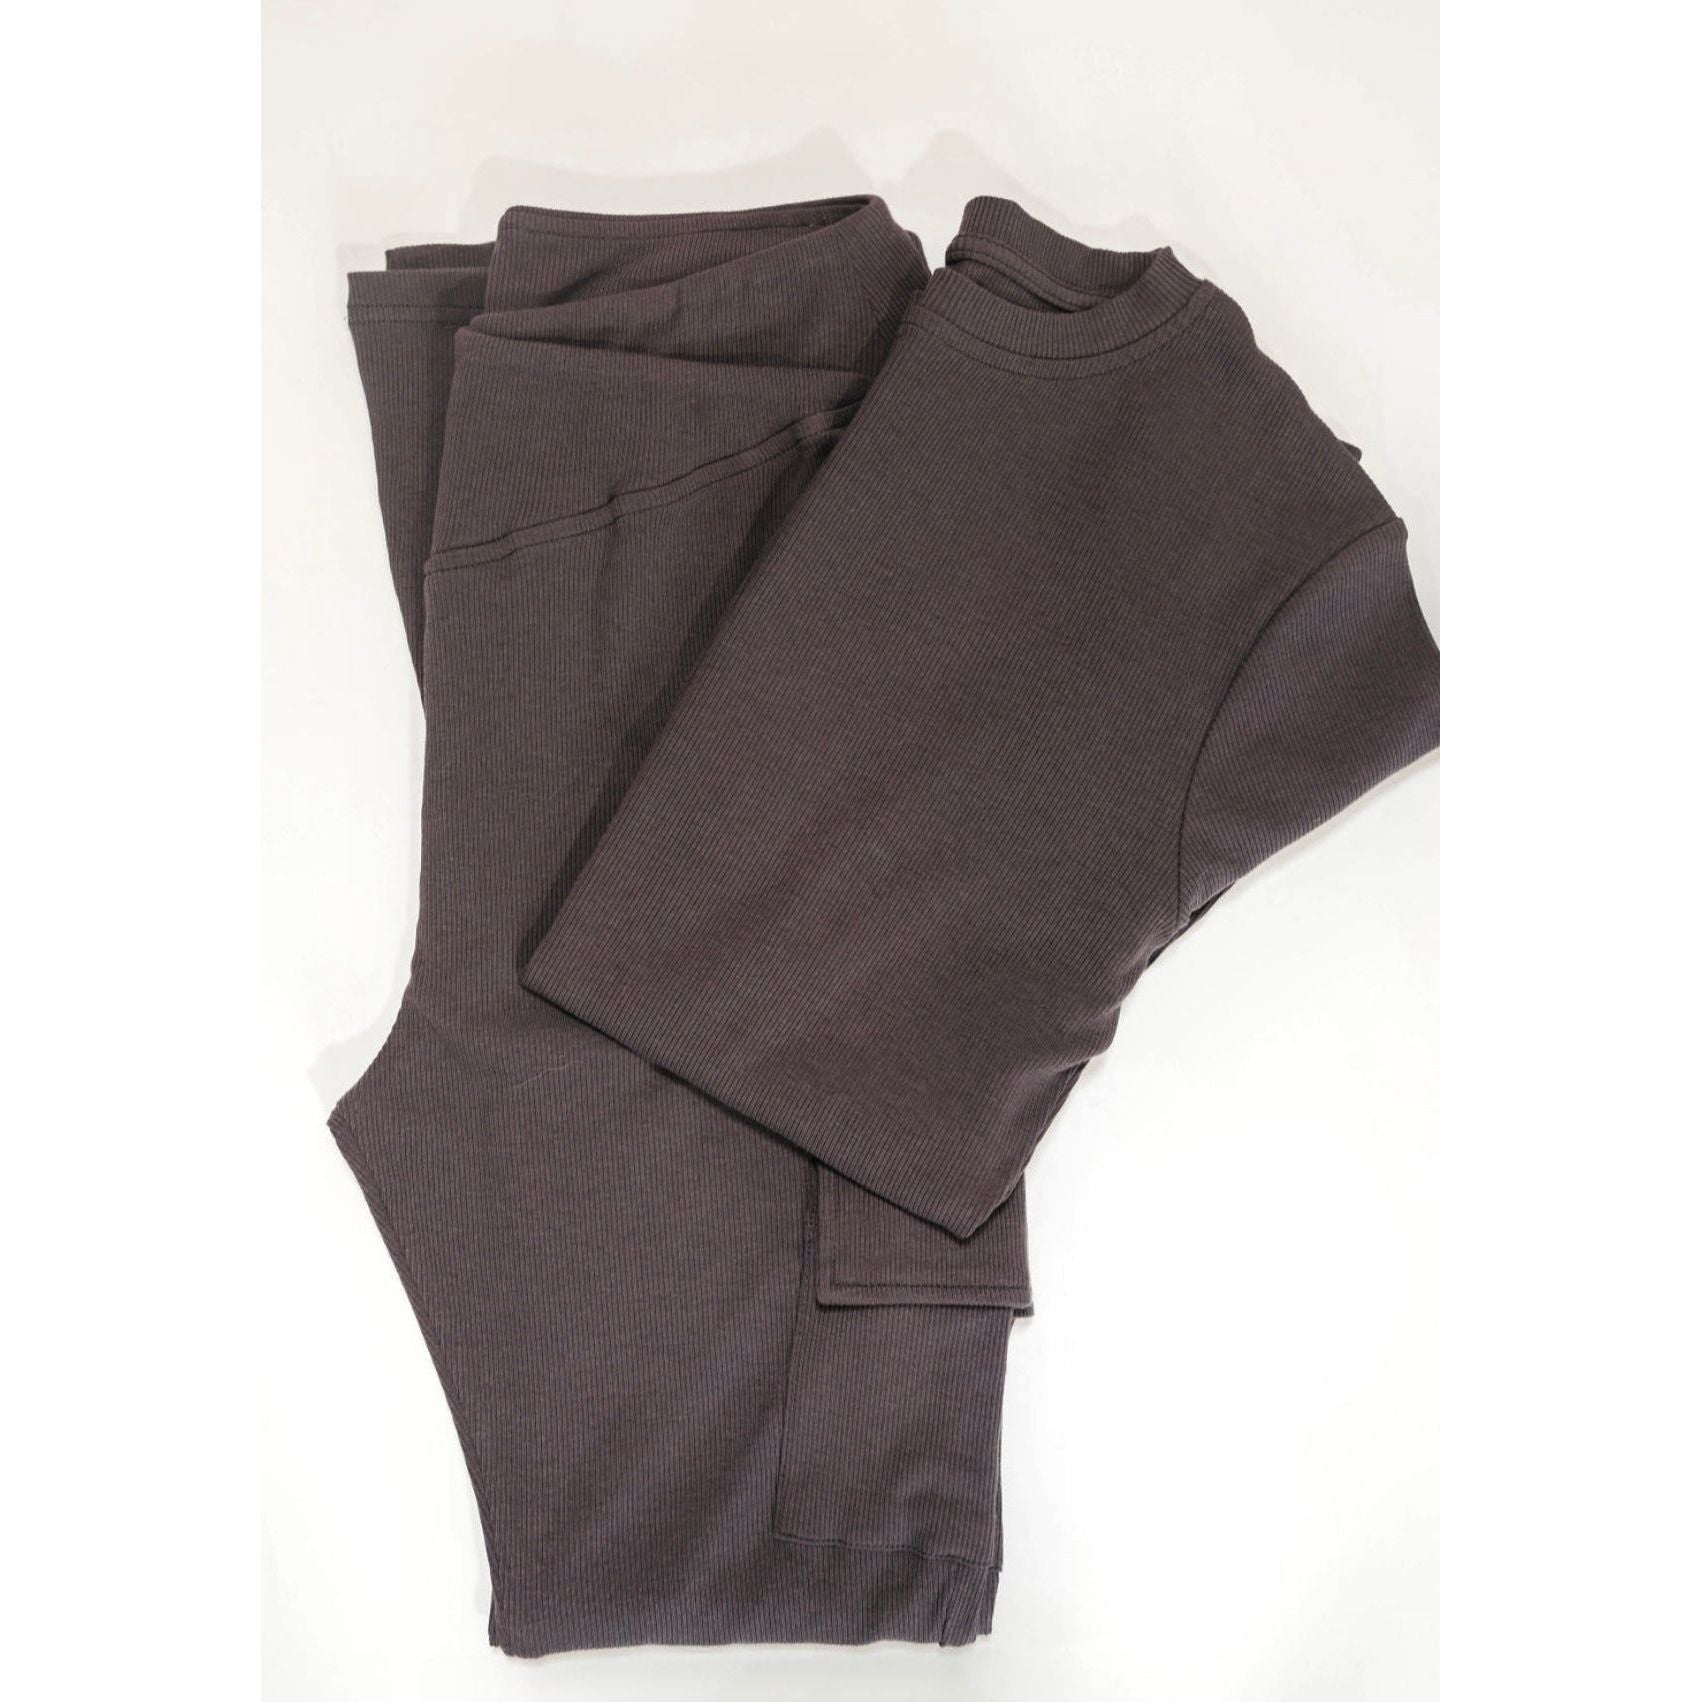 Ribbed Everyday Essential Pants in - Truffle ( PRESALE Ships in about 2-3 weeks) - Nighty Nites Co